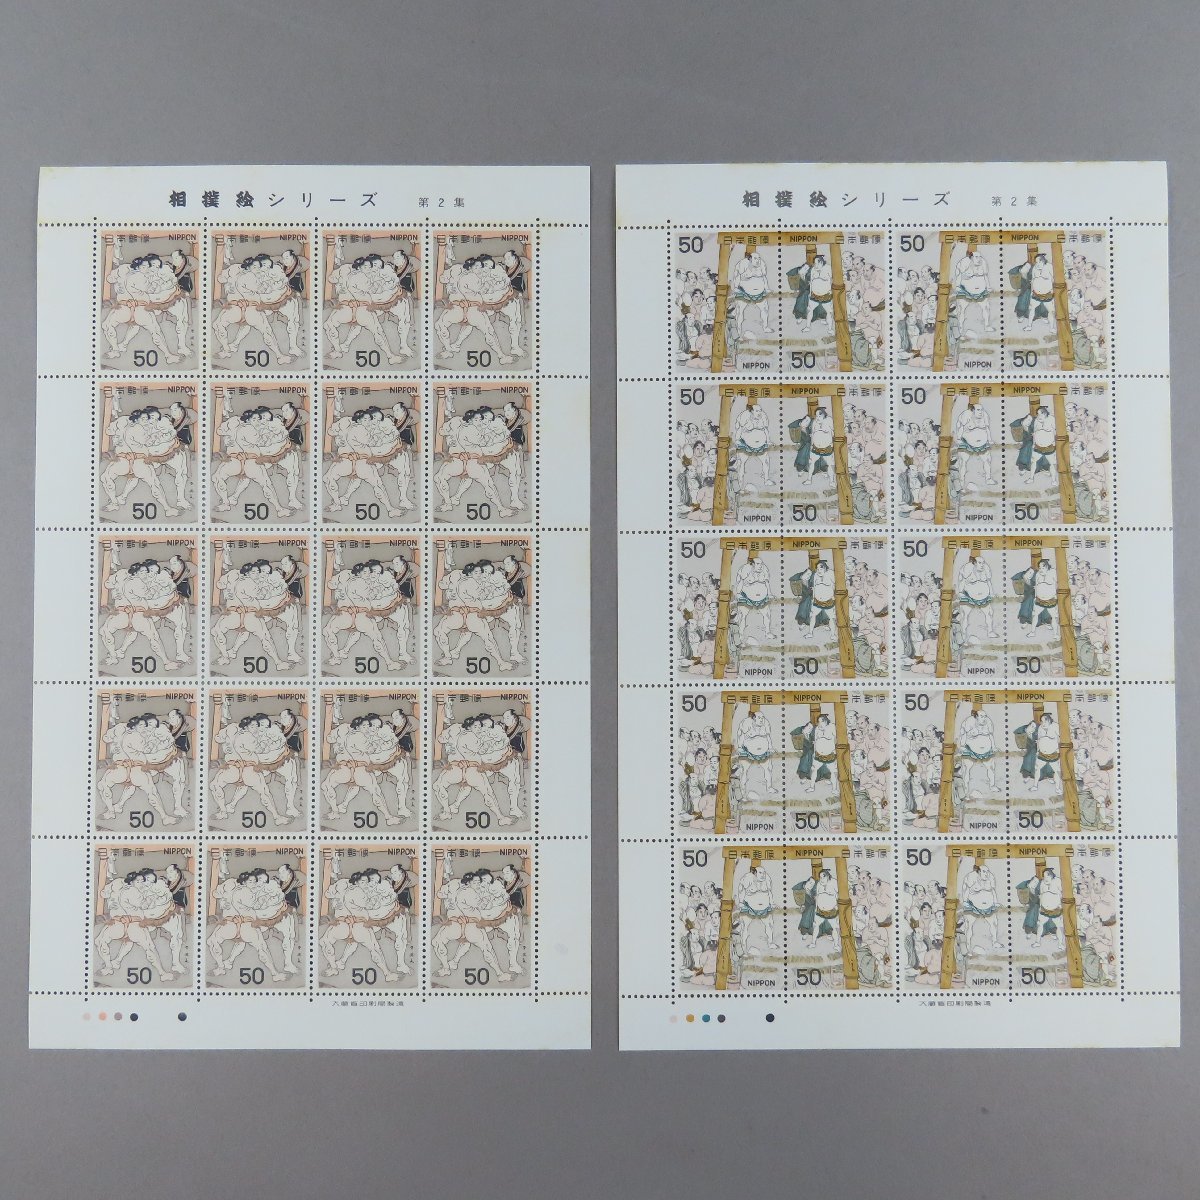 [ stamp 2257] sumo picture series no. 2 compilation 2 kind 50 jpy 20 surface 2 seat 